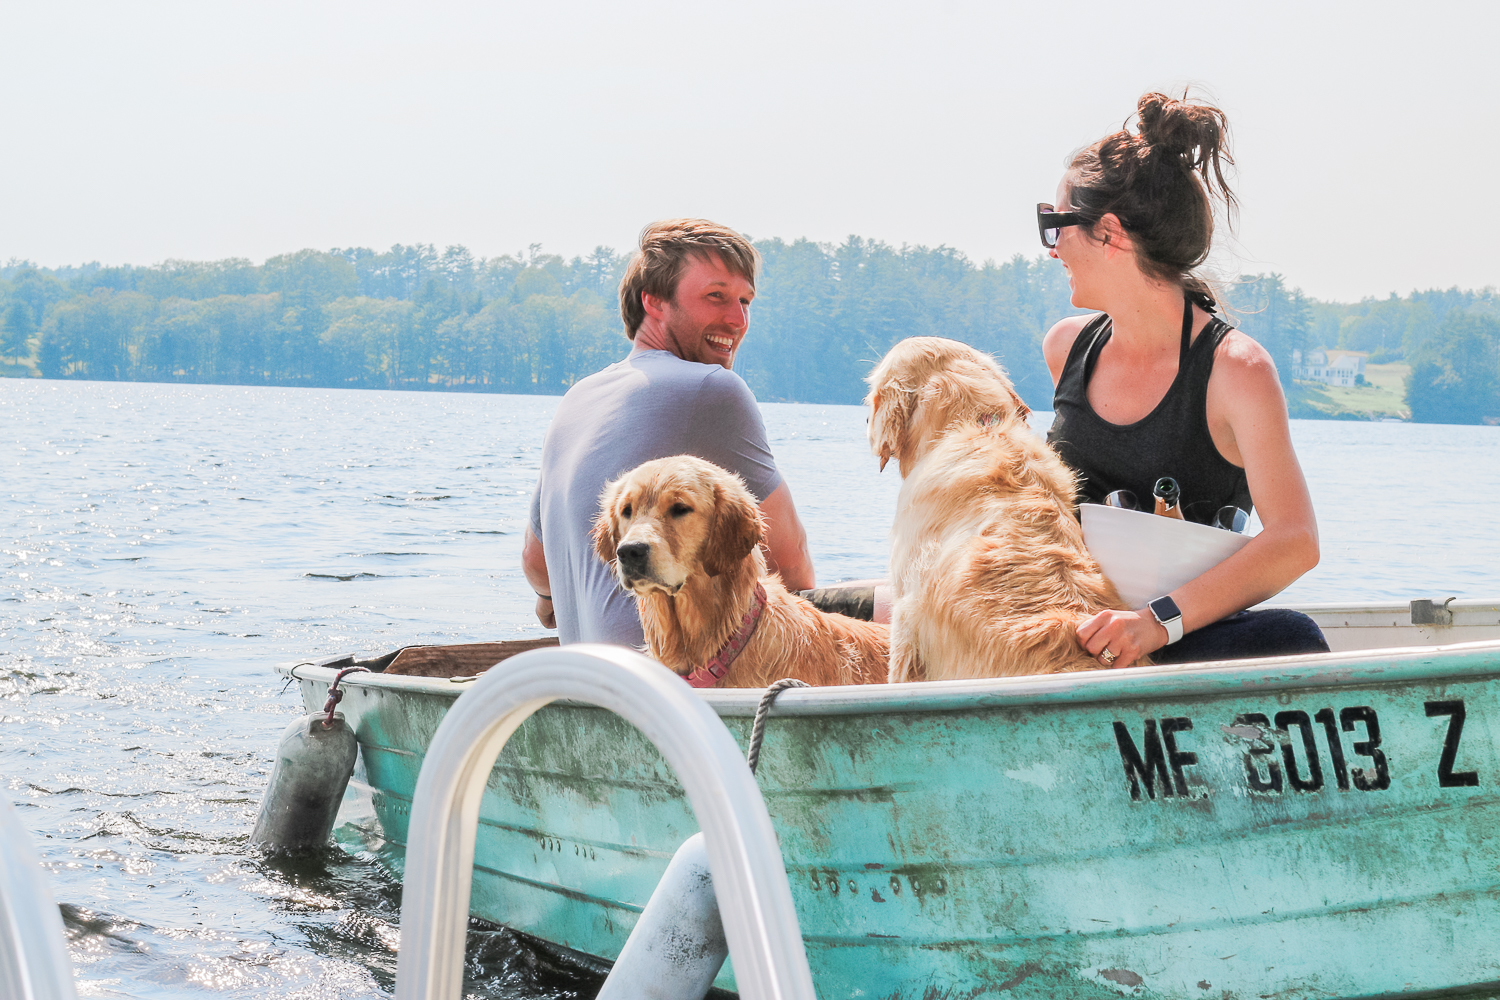 Our Maine Proposal Story by popular midwest lifestyle blogger Stephanie Ziajka from Diary of a Debutante, Damariscotta Lake proposal photos, Maine engagement photos